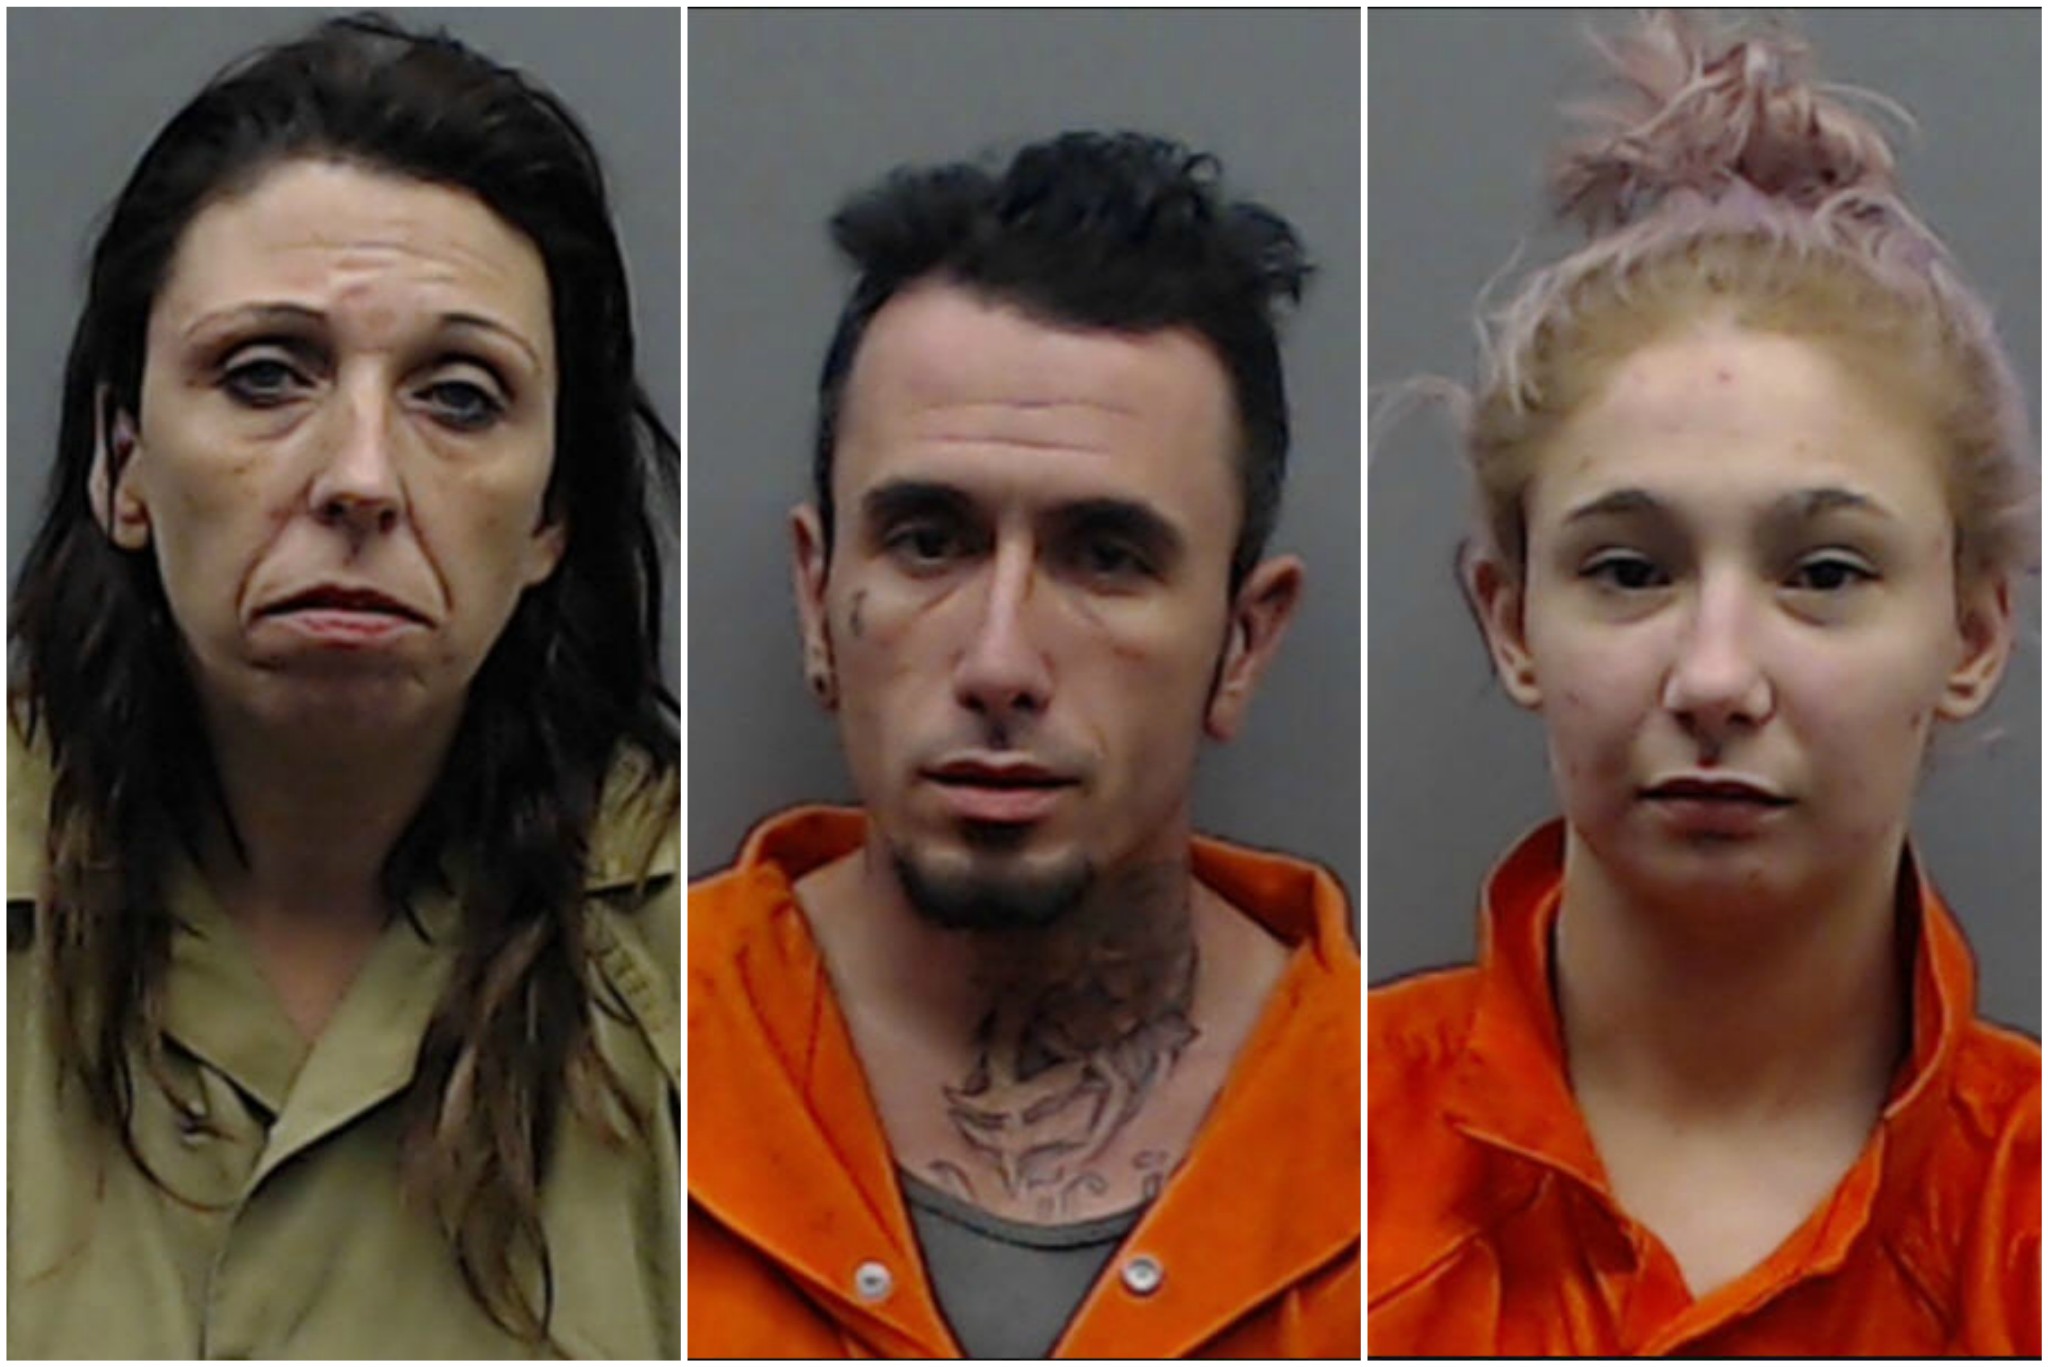 Police: Suspects in East Texas crime ring stole vehicles, possessed meth and cocaine ...2048 x 1367